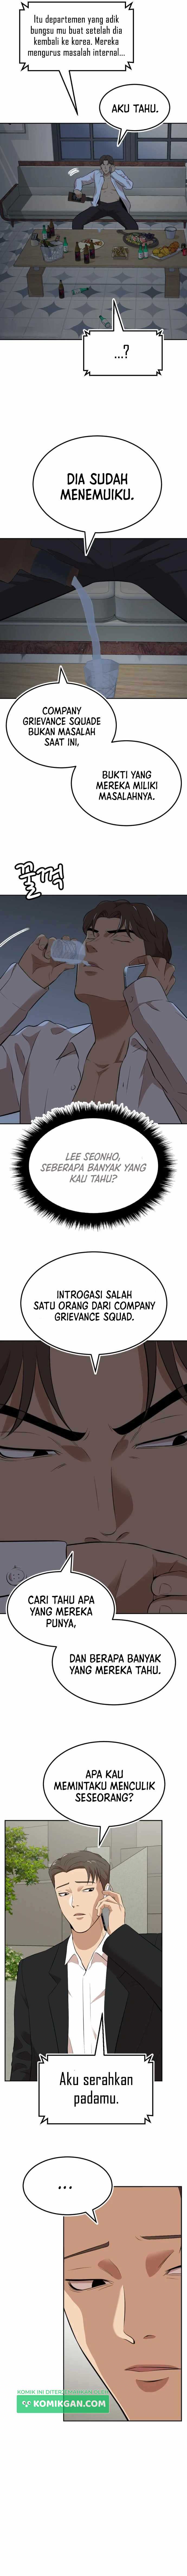 Company Grievance Squad Chapter 10